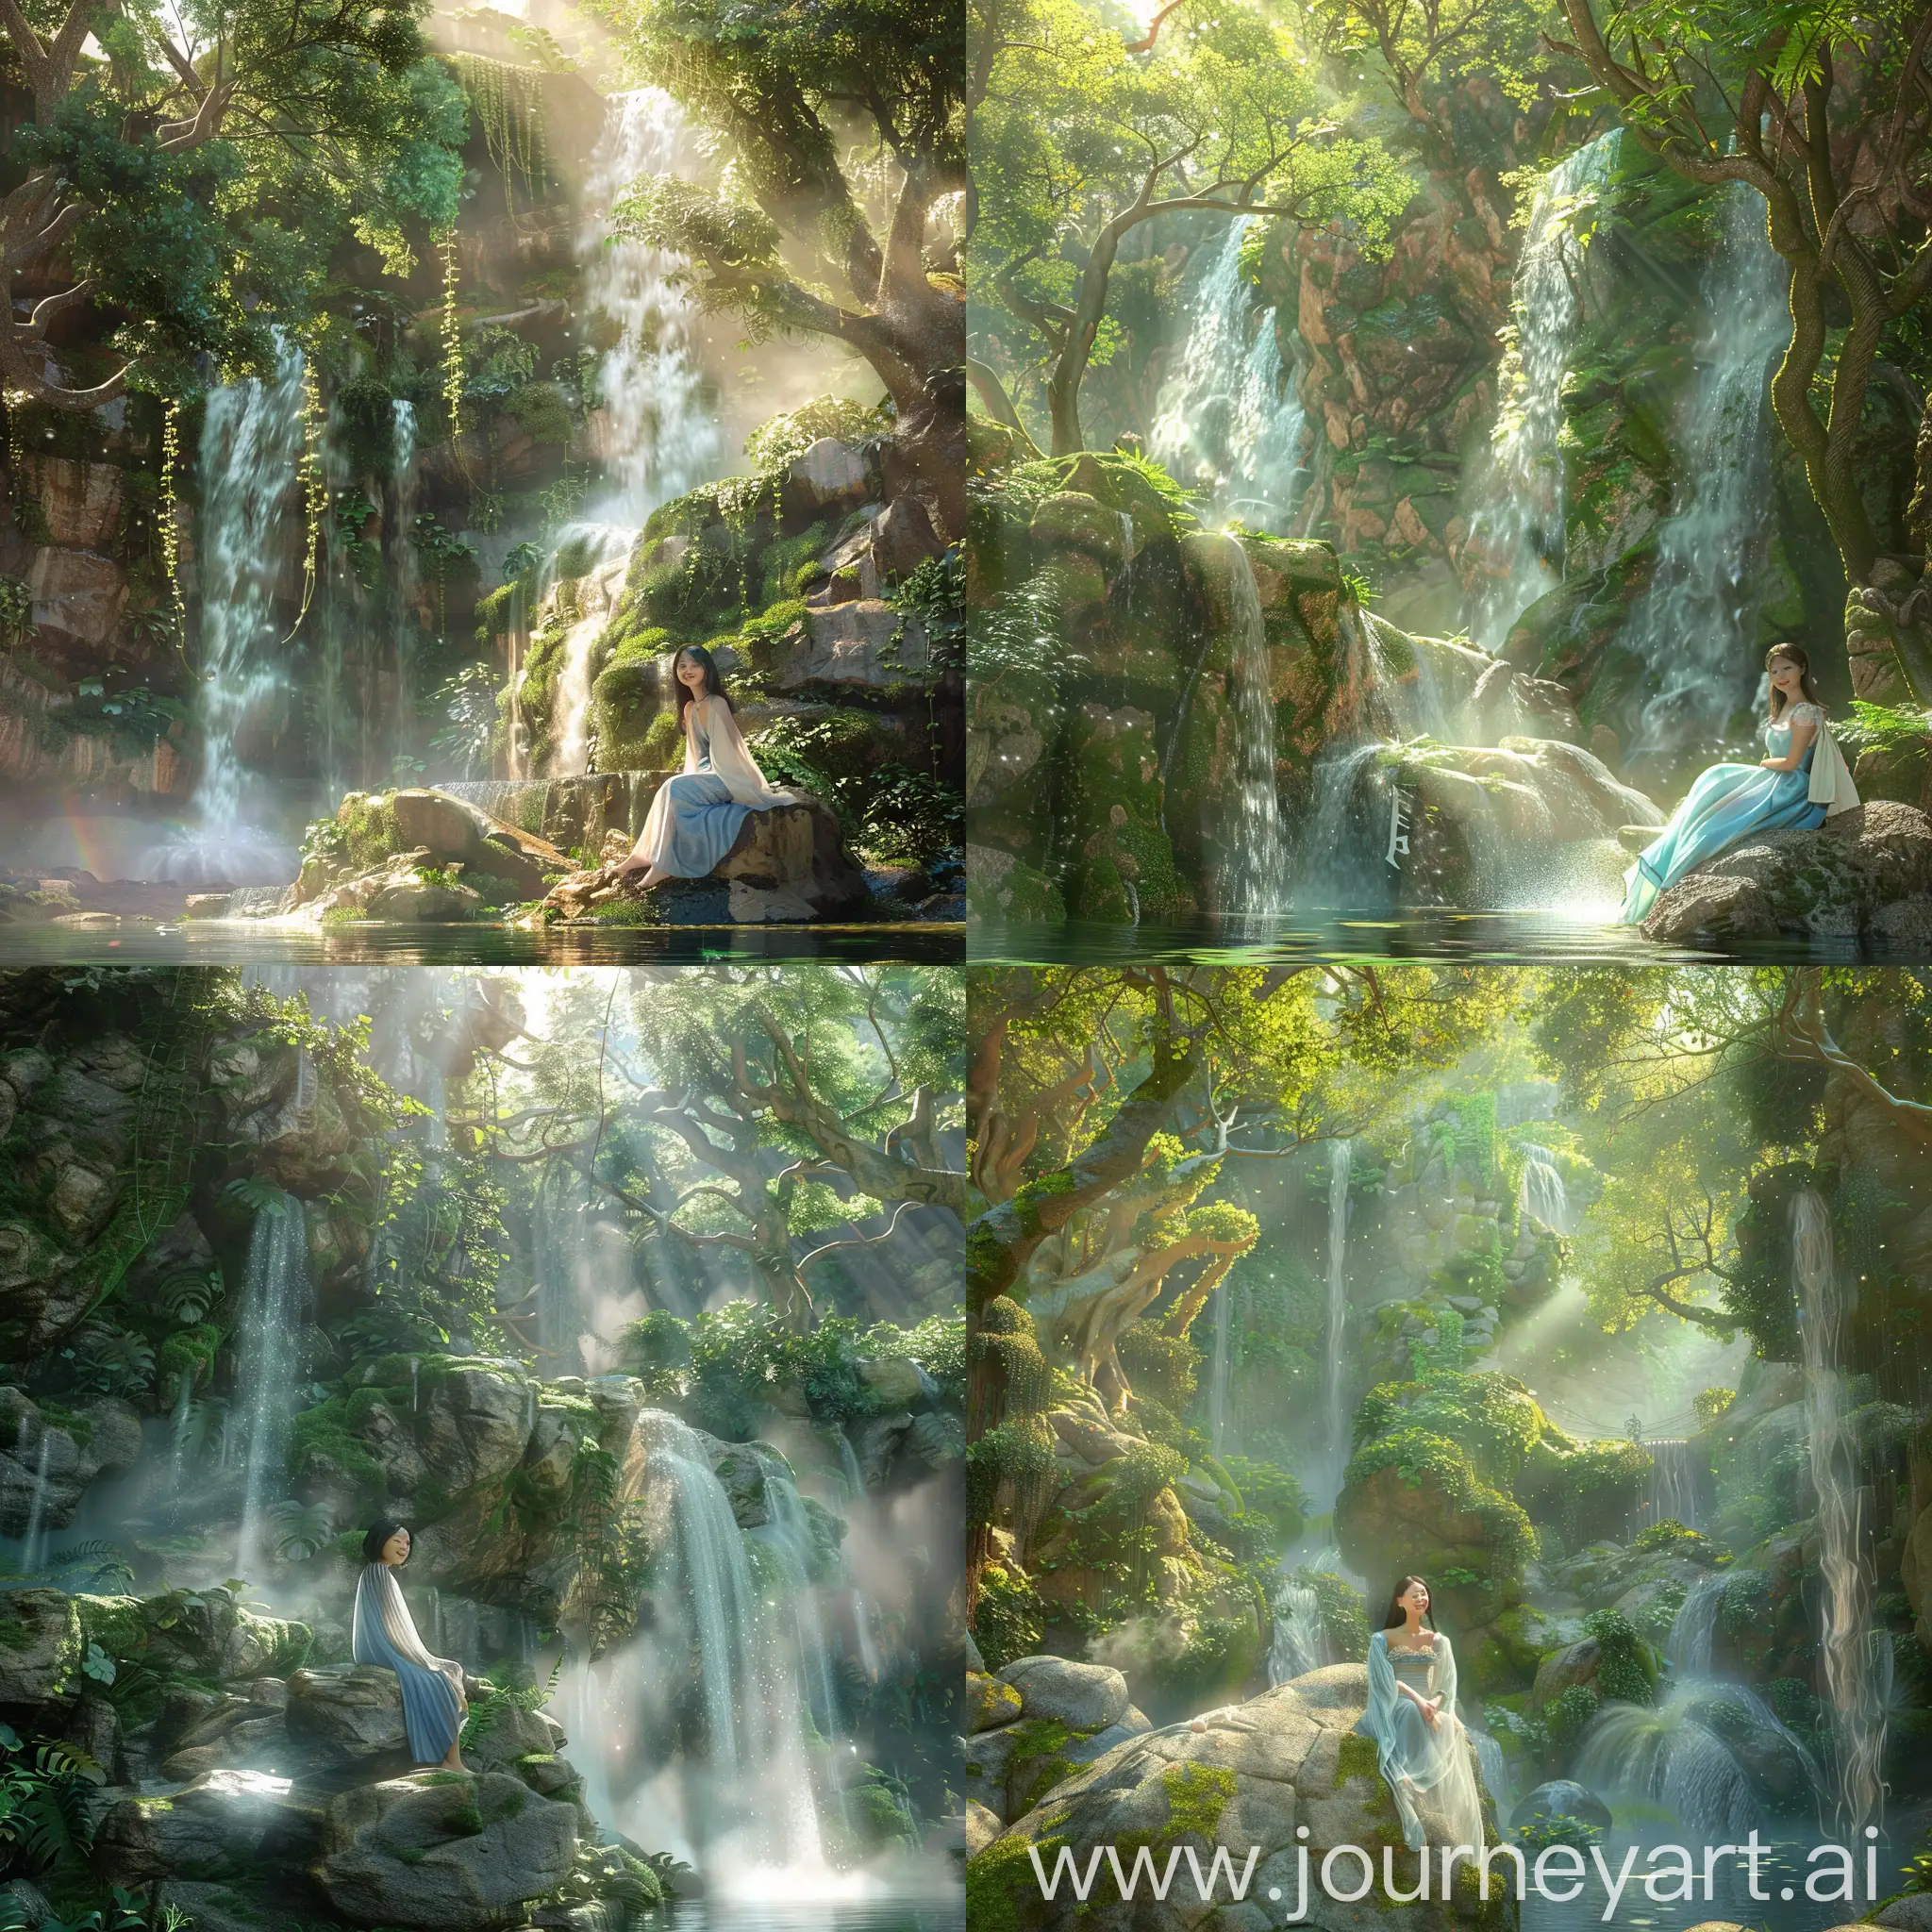 photorealistic scenery of a hidden waterfall cascading down a moss-covered cliff face, surrounded by lush greenery and ancient trees. The water pools into a crystal-clear pool below, and mist hangs in the air. Sunlight filters through the trees, casting a magical glow on the scene. There is a large boulder on the pool side on which sat a 23 year old cute asian girl donning bluish-white gradient dress with a semi-transparent pure white shawl on her shoulder smiling with warm expression toward the close up camera whose focus is the girl